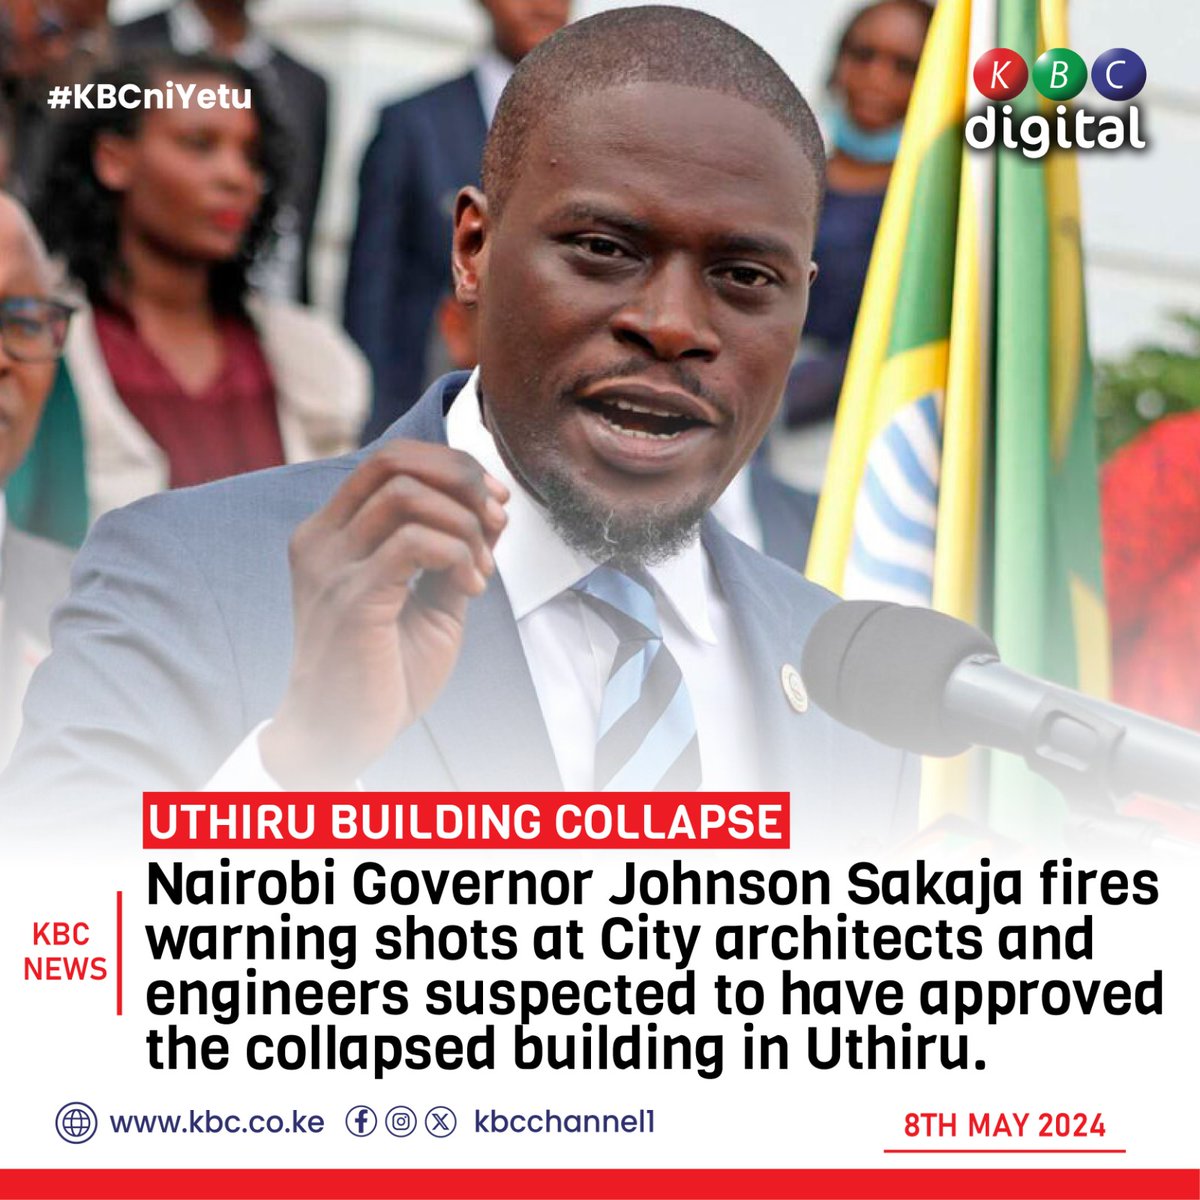 Nairobi Governor Johnson Sakaja fires warning shots at City architects and engineers suspected to have approved the collapsed building in Uthiru. #KBCniYetu ^RO